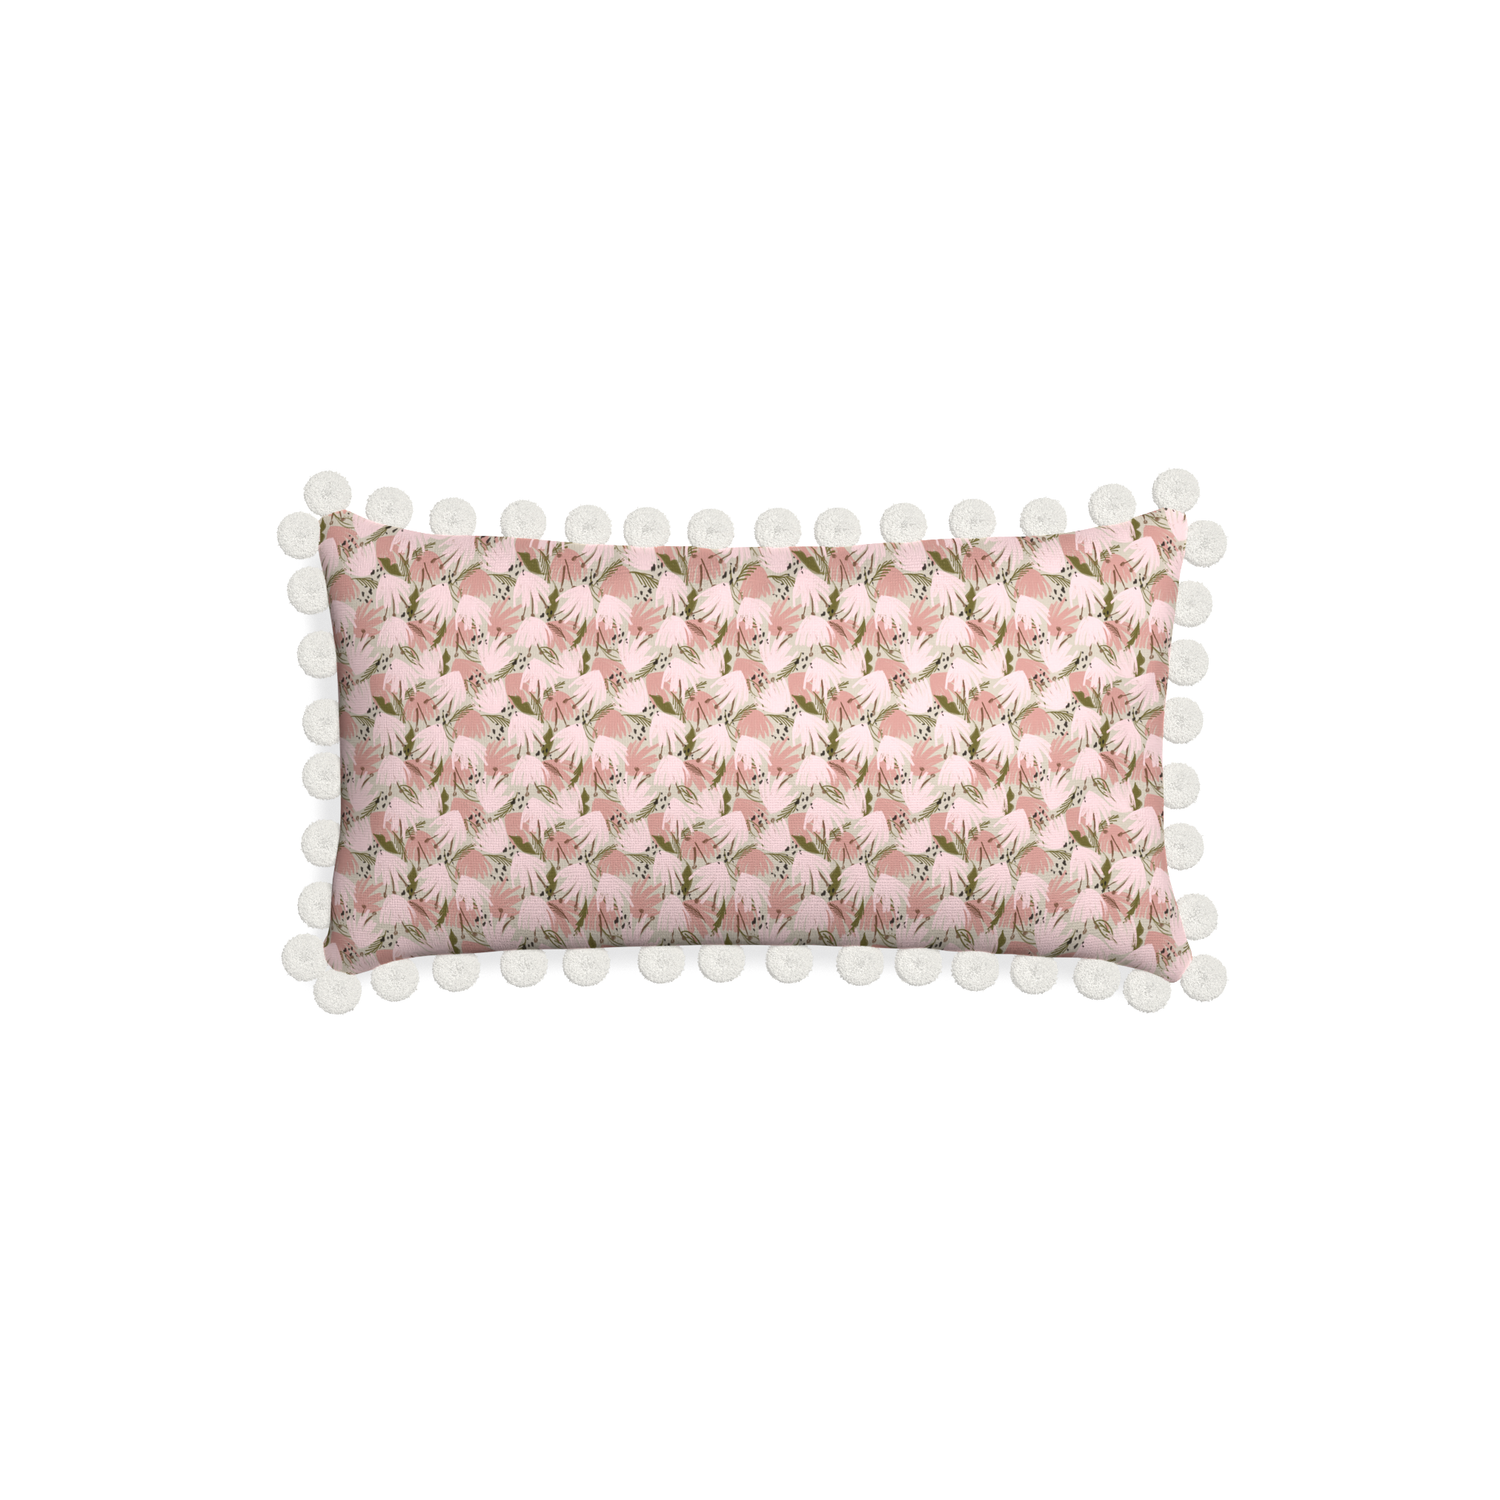 Lumbar eden pink custom pink floralpillow with snow pom pom on white background